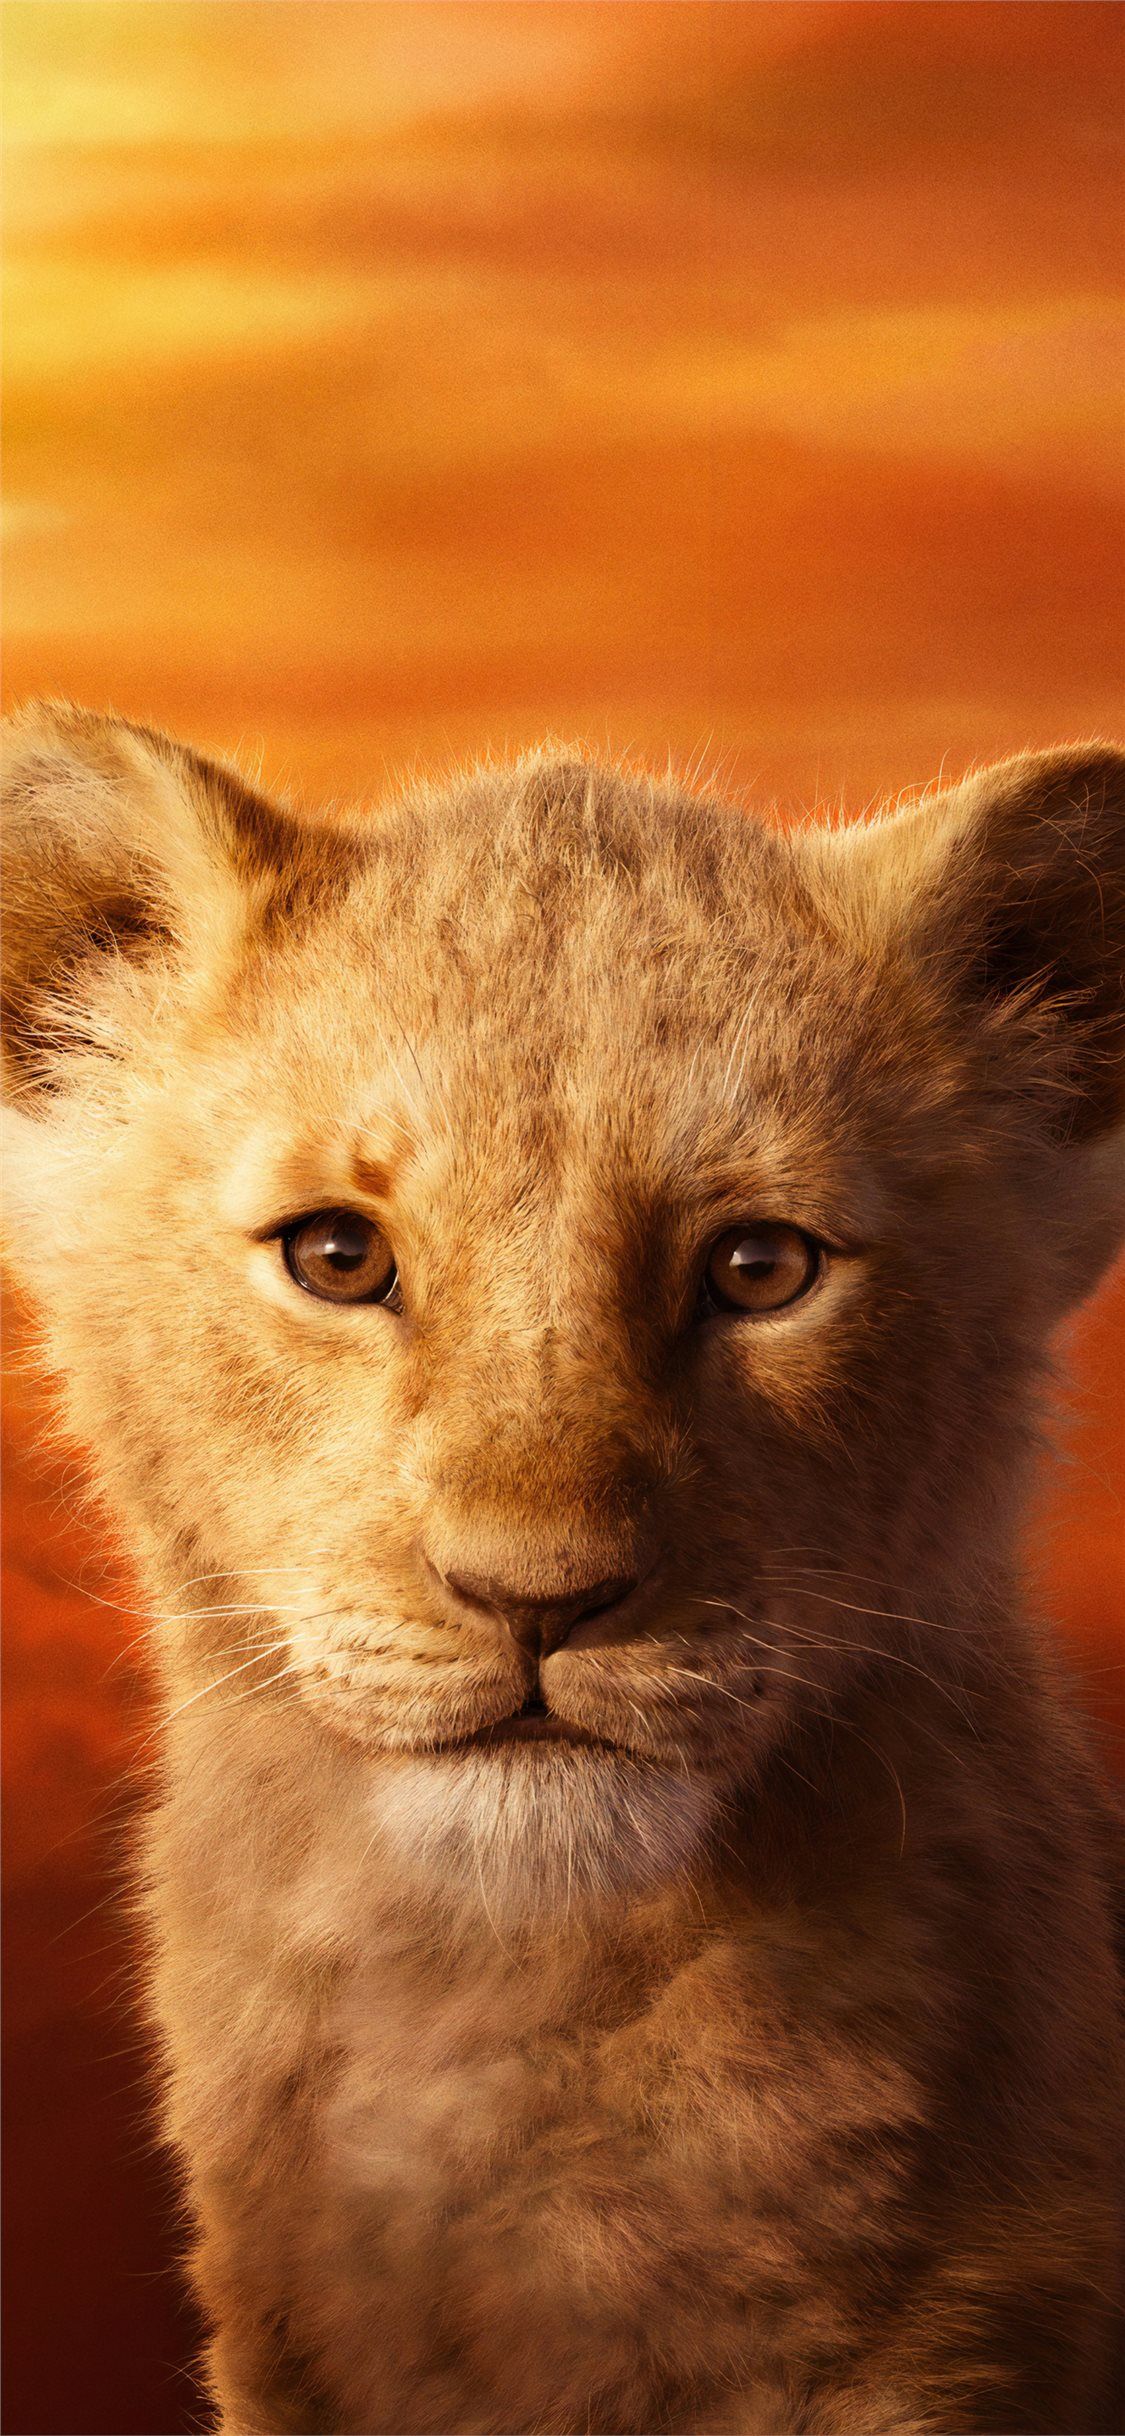 jd mccrary as simba the lion king 2019 4k iPhone X Wallpaper Free Download